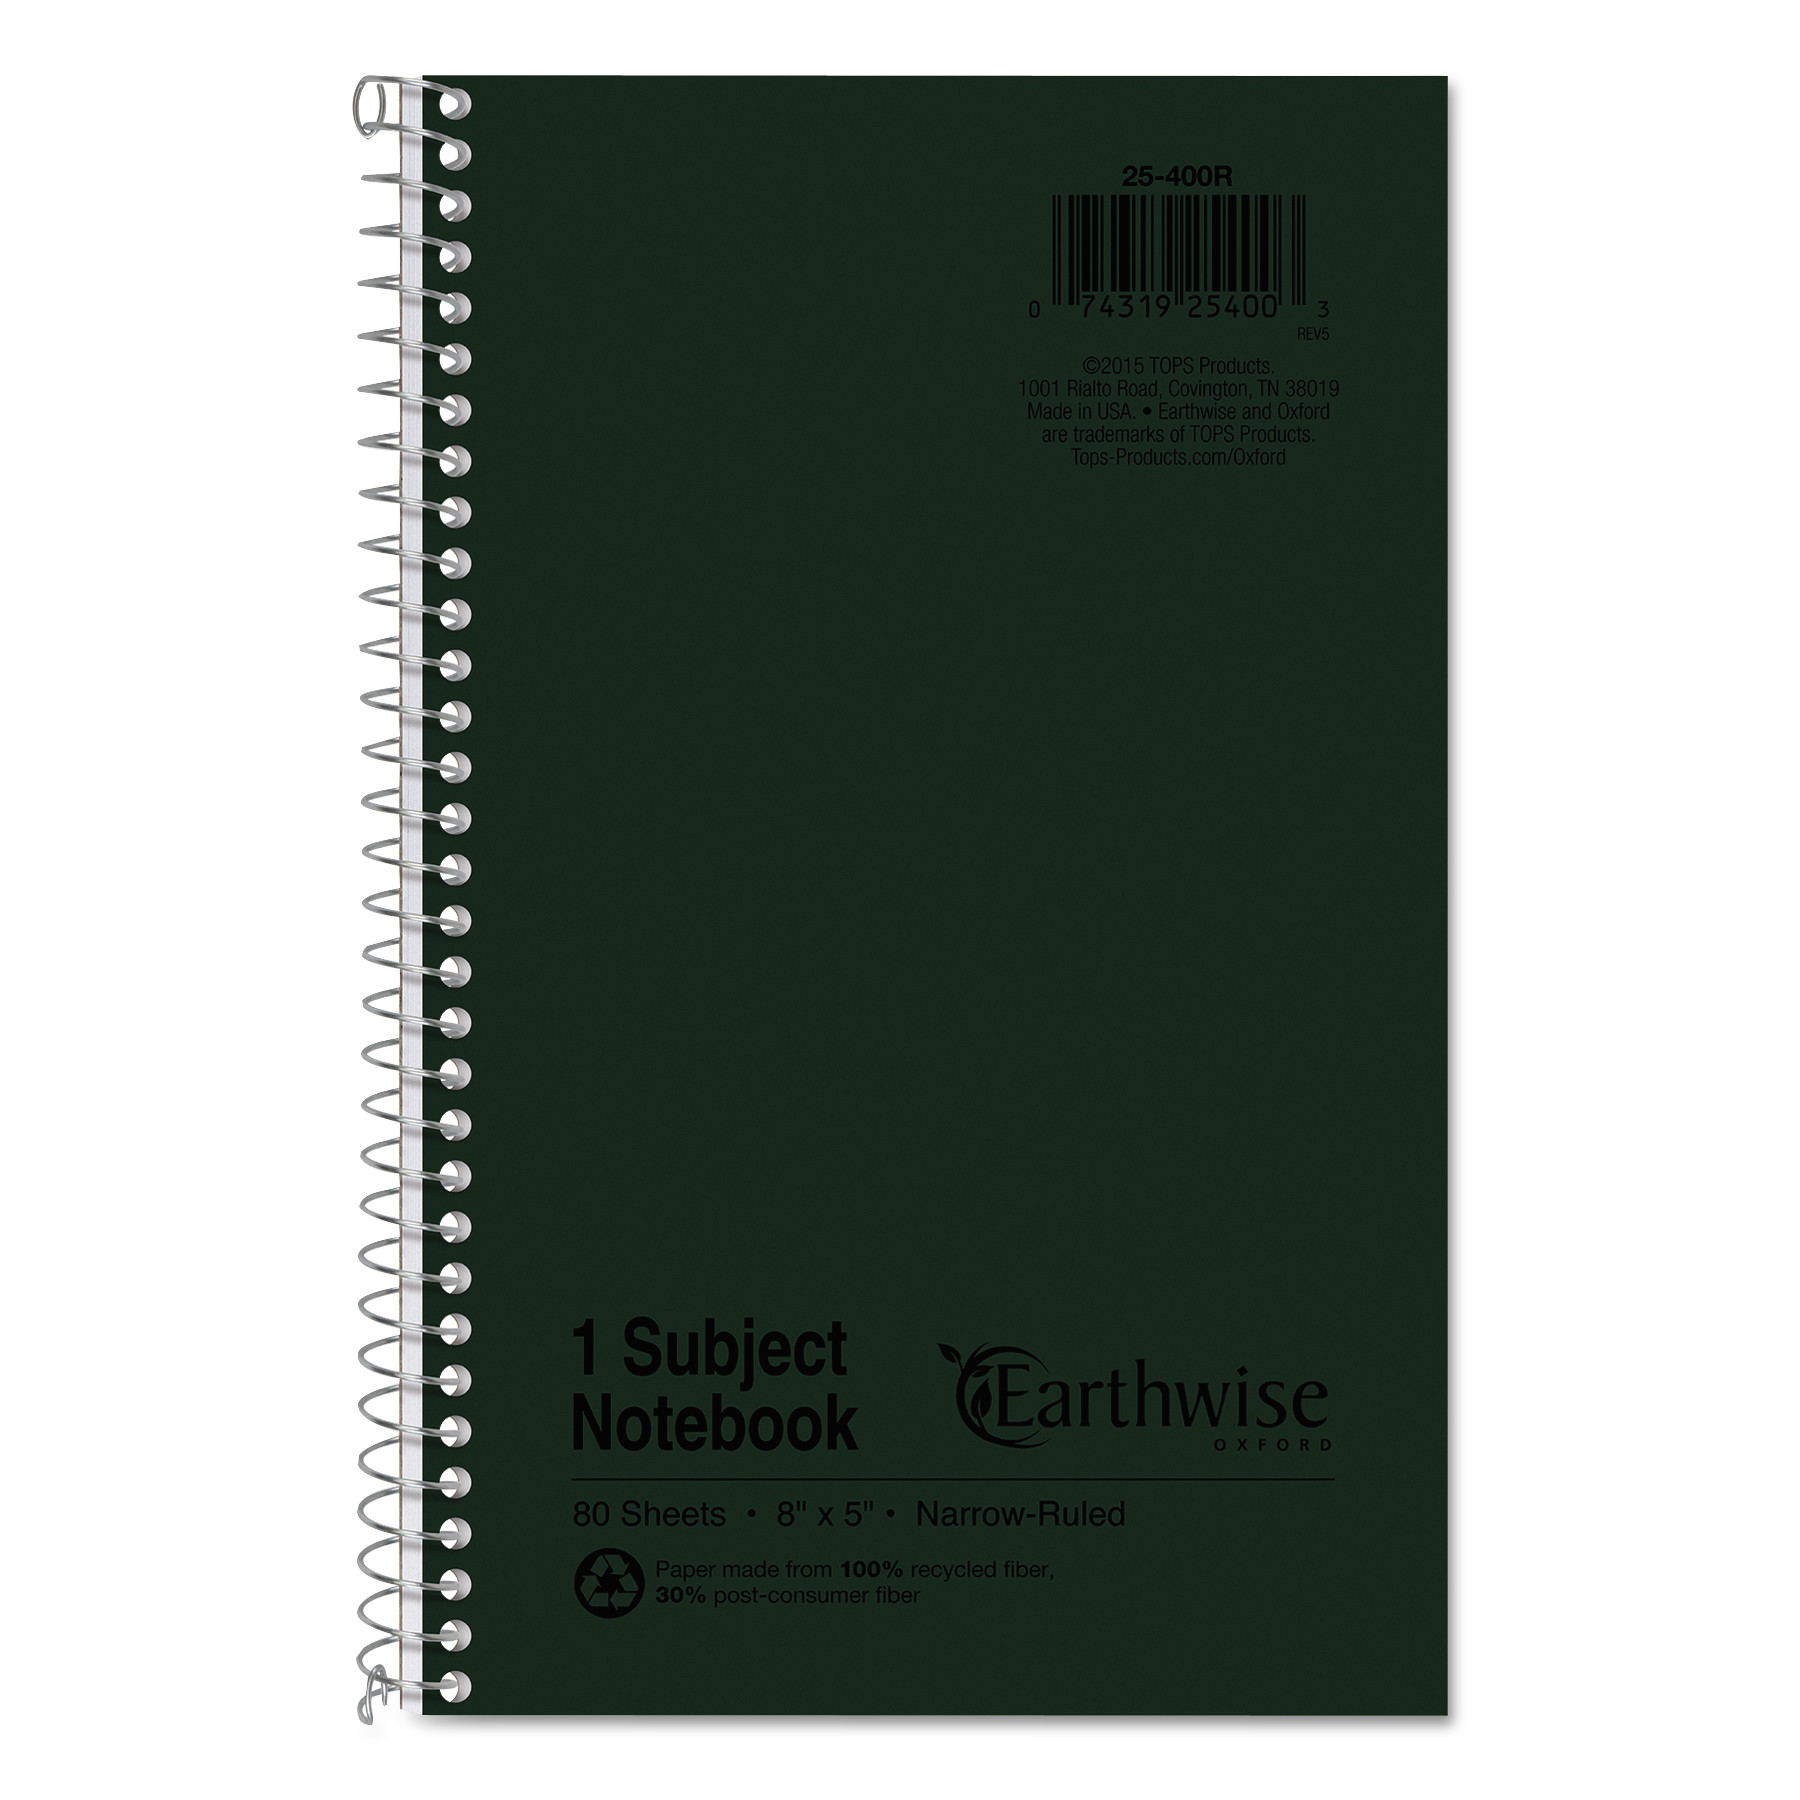  Oxford 25-400R Earthwise by 100% Recycled One-Subject Notebook, 1 Subject, Narrow Rule, Green Cover, 8 x 5, 80 Sheets (TOP25400) 